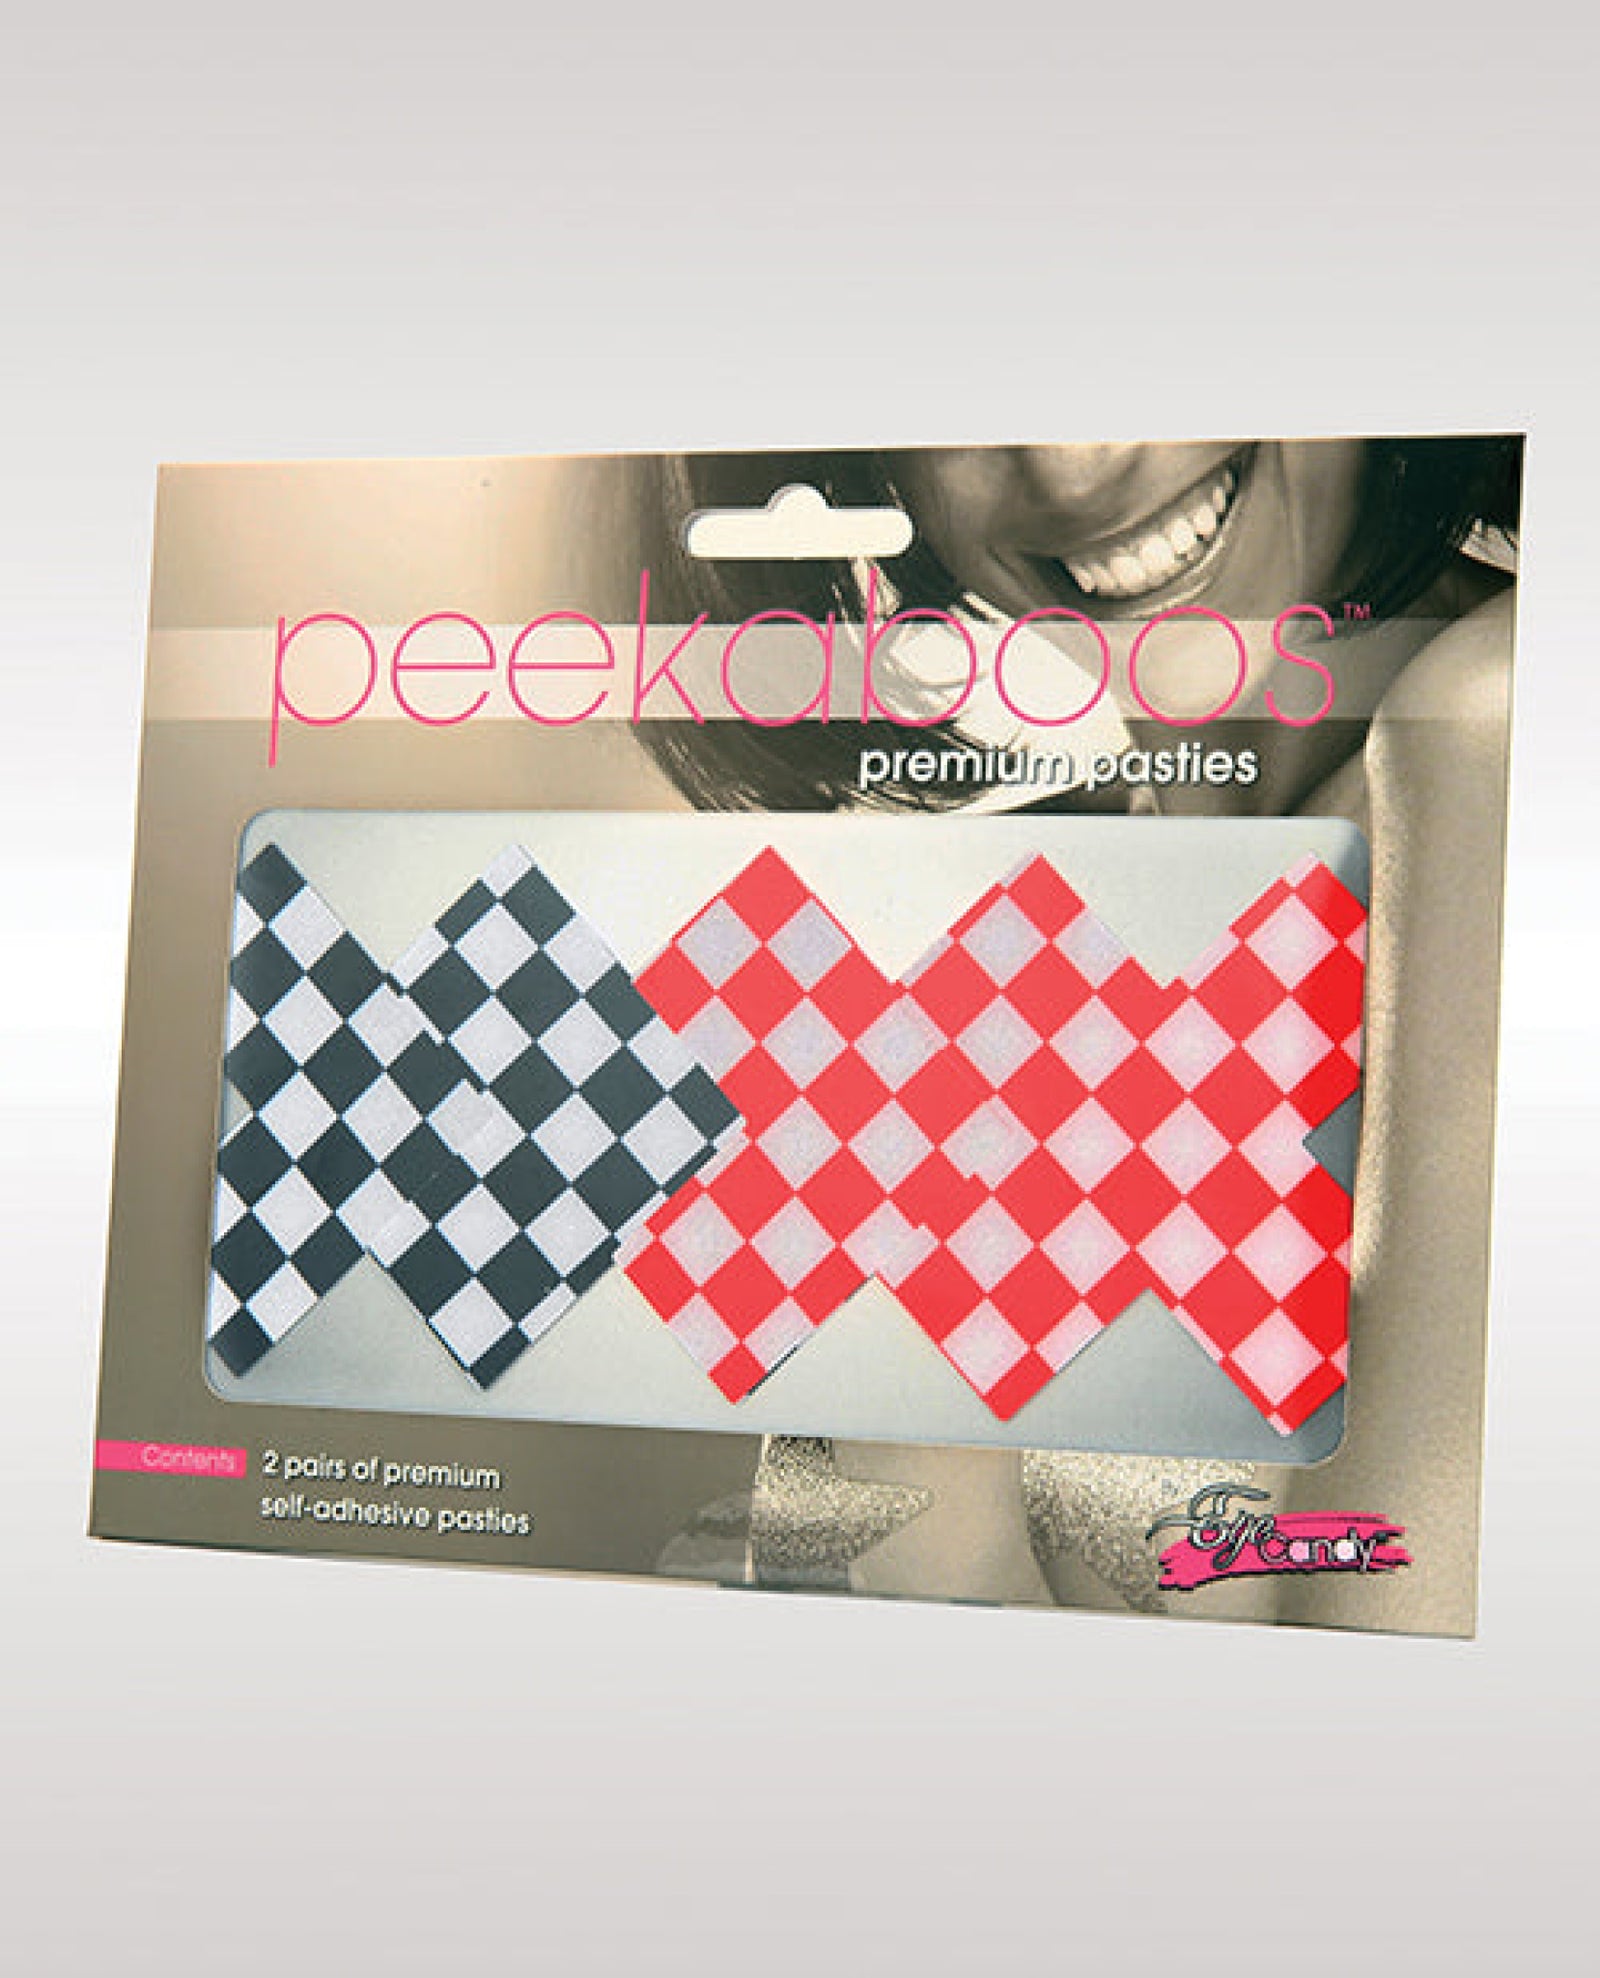 Peekaboos Off The Wall Checkered Pasties - 2 Pairs 1 Black-1 Red Xgen